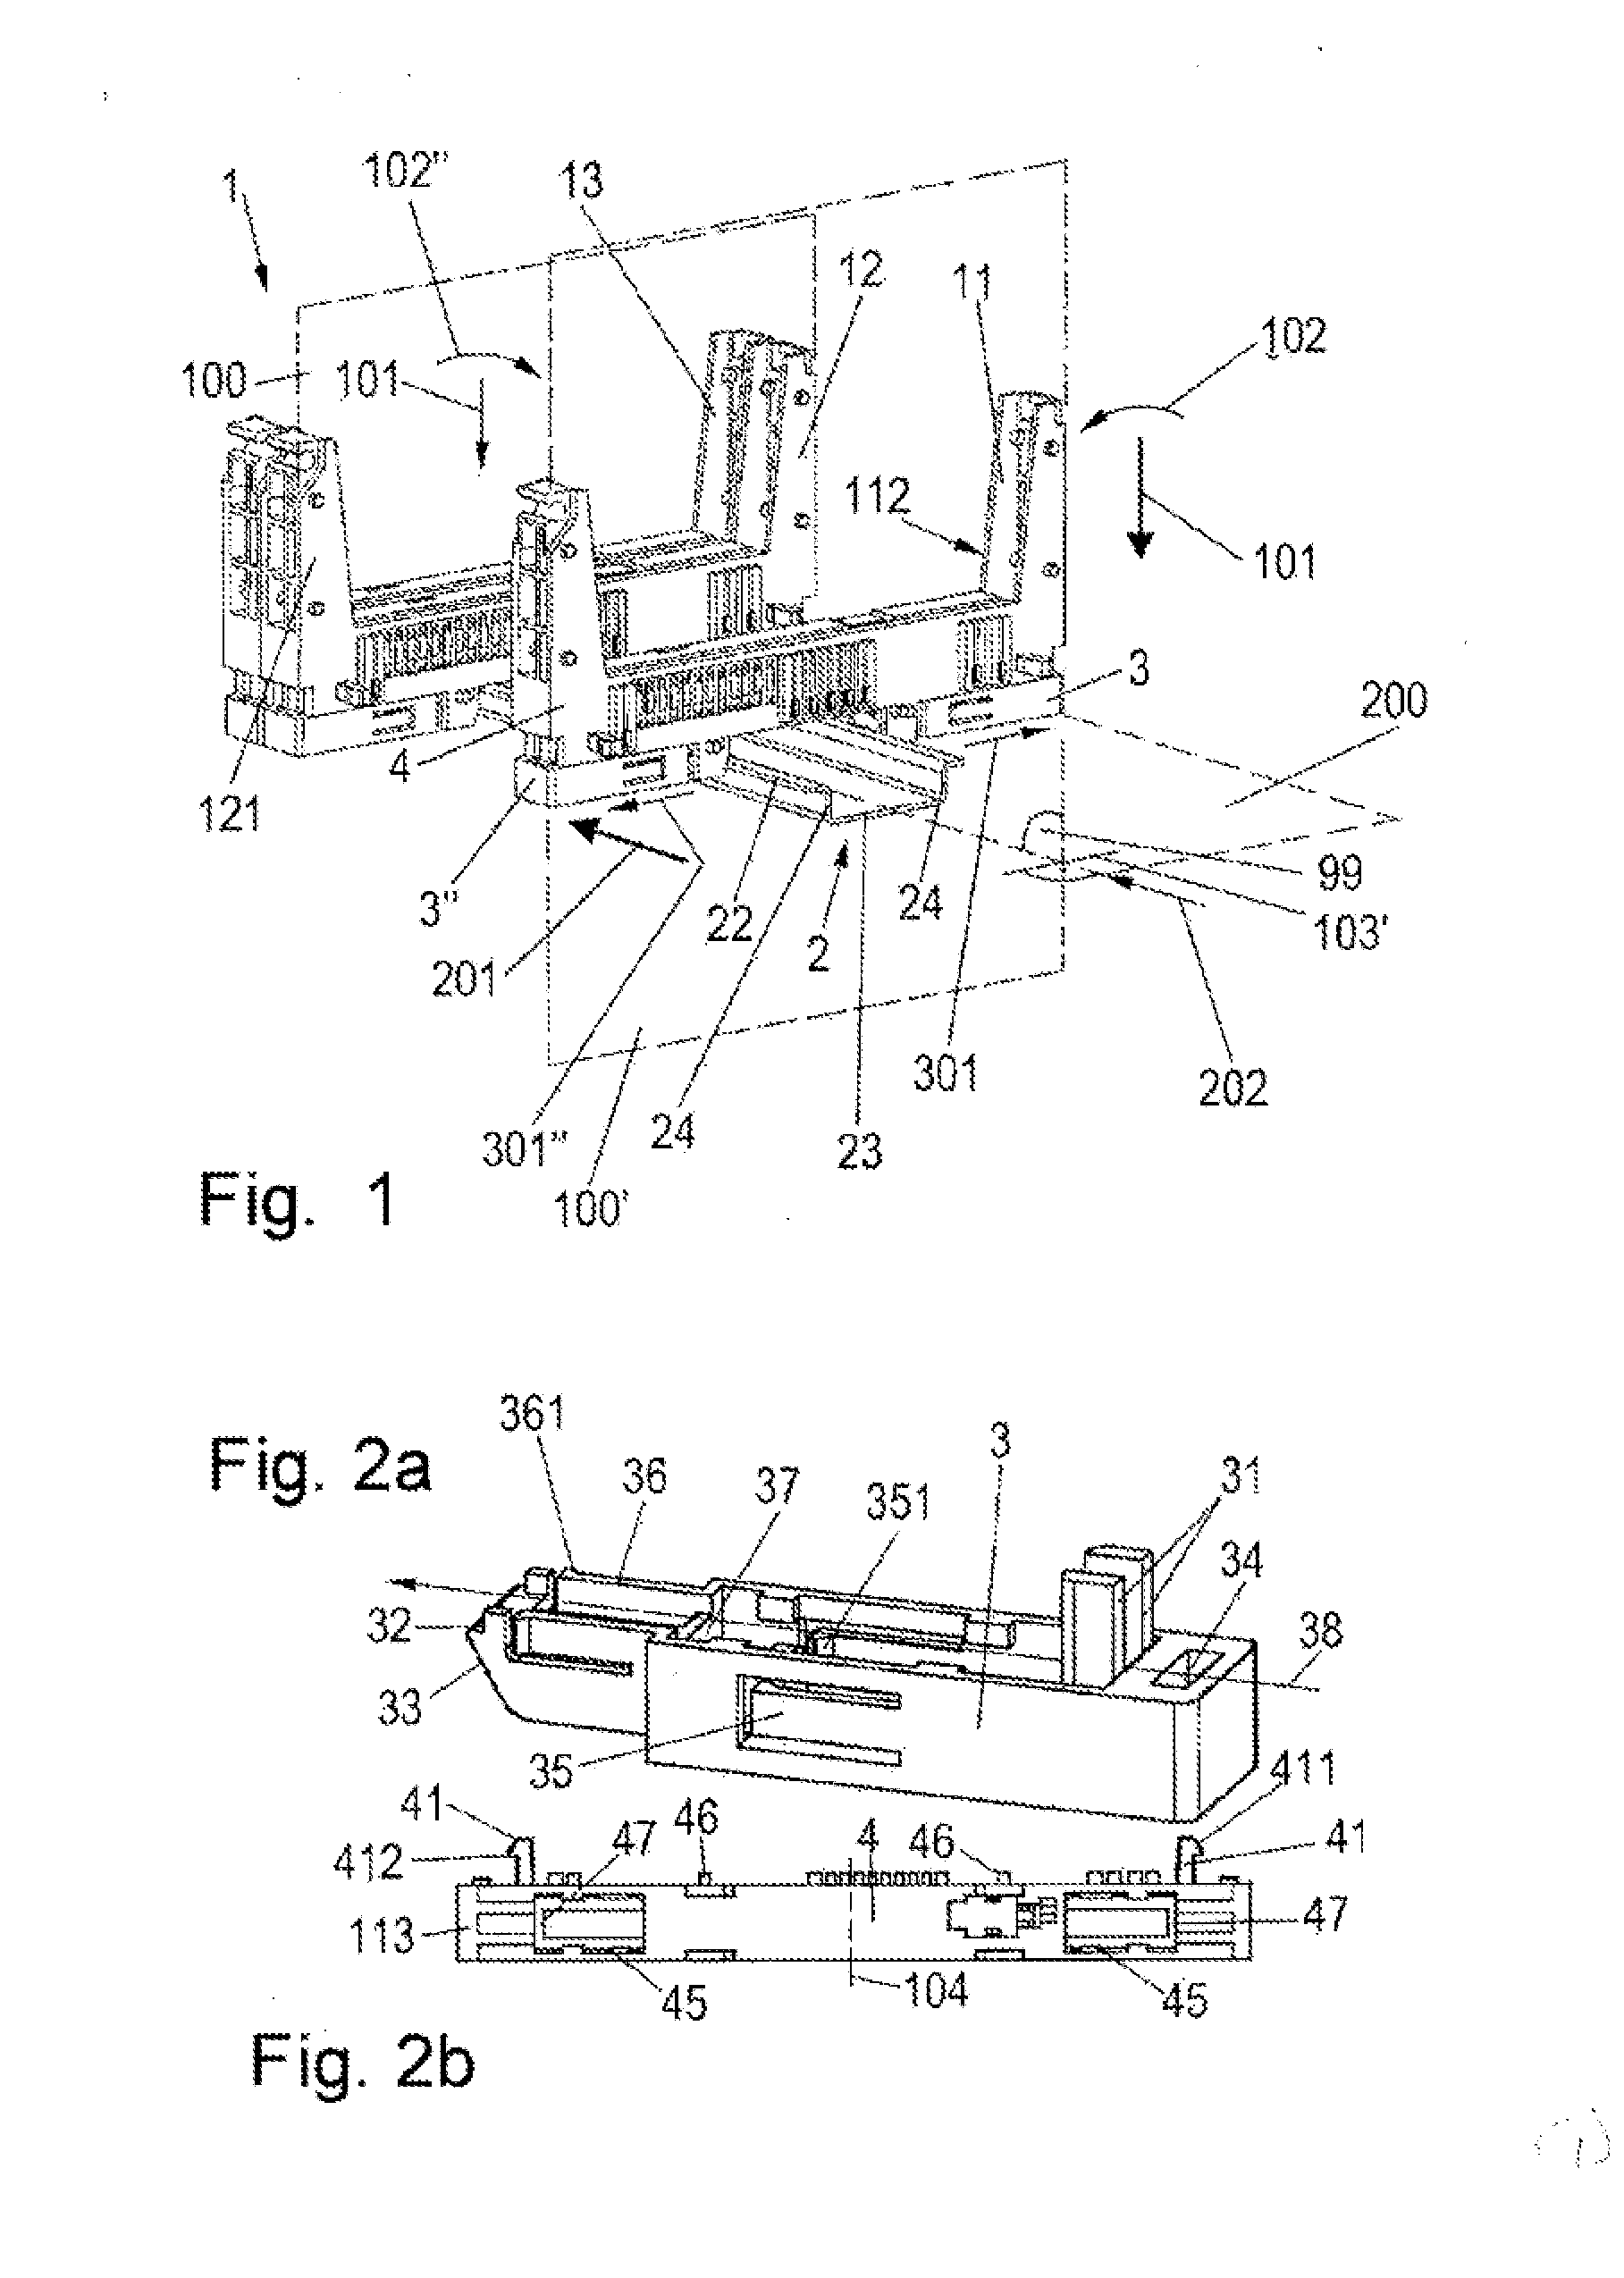 Mounting rail and module latching system